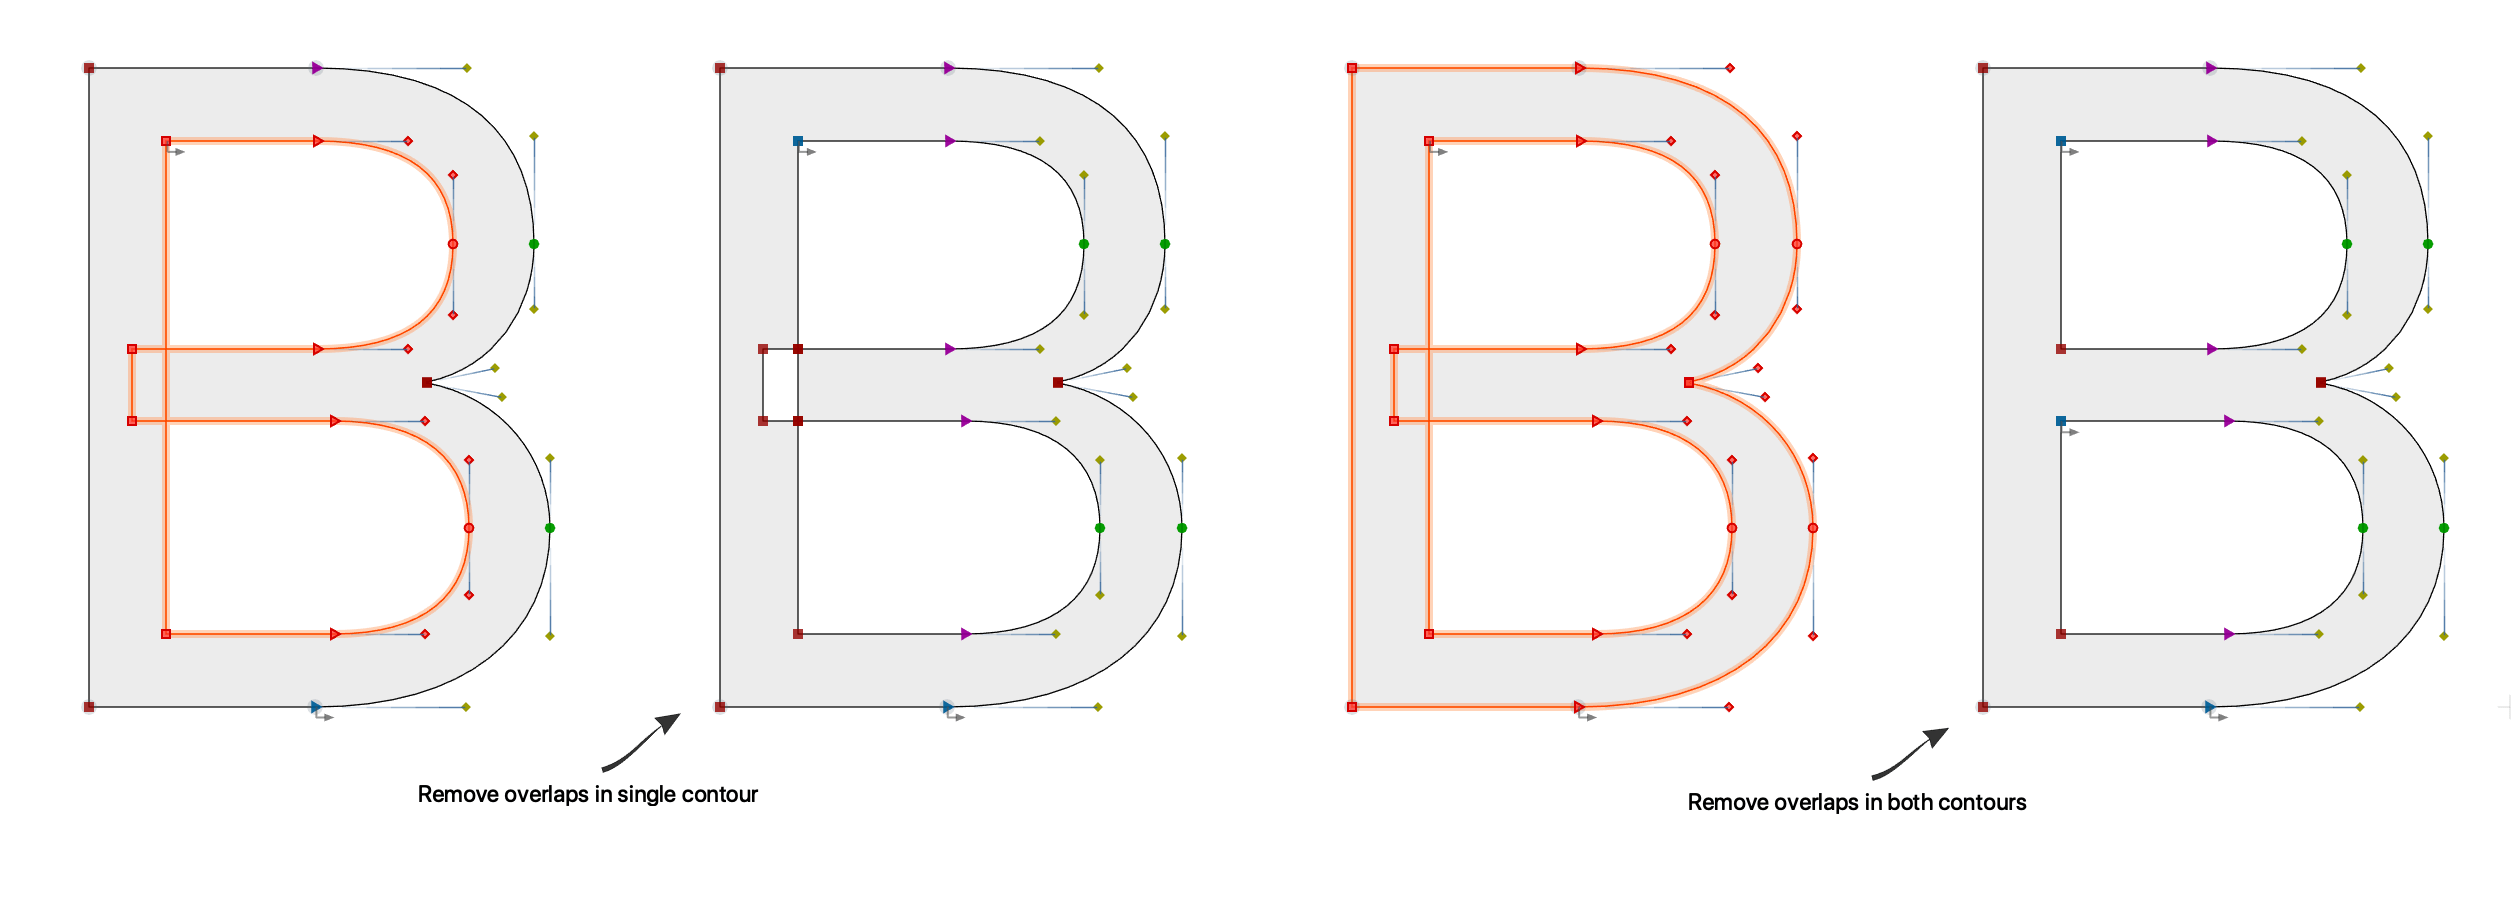 Remove Overlap in a single inner contour (left) and in all contours (right)